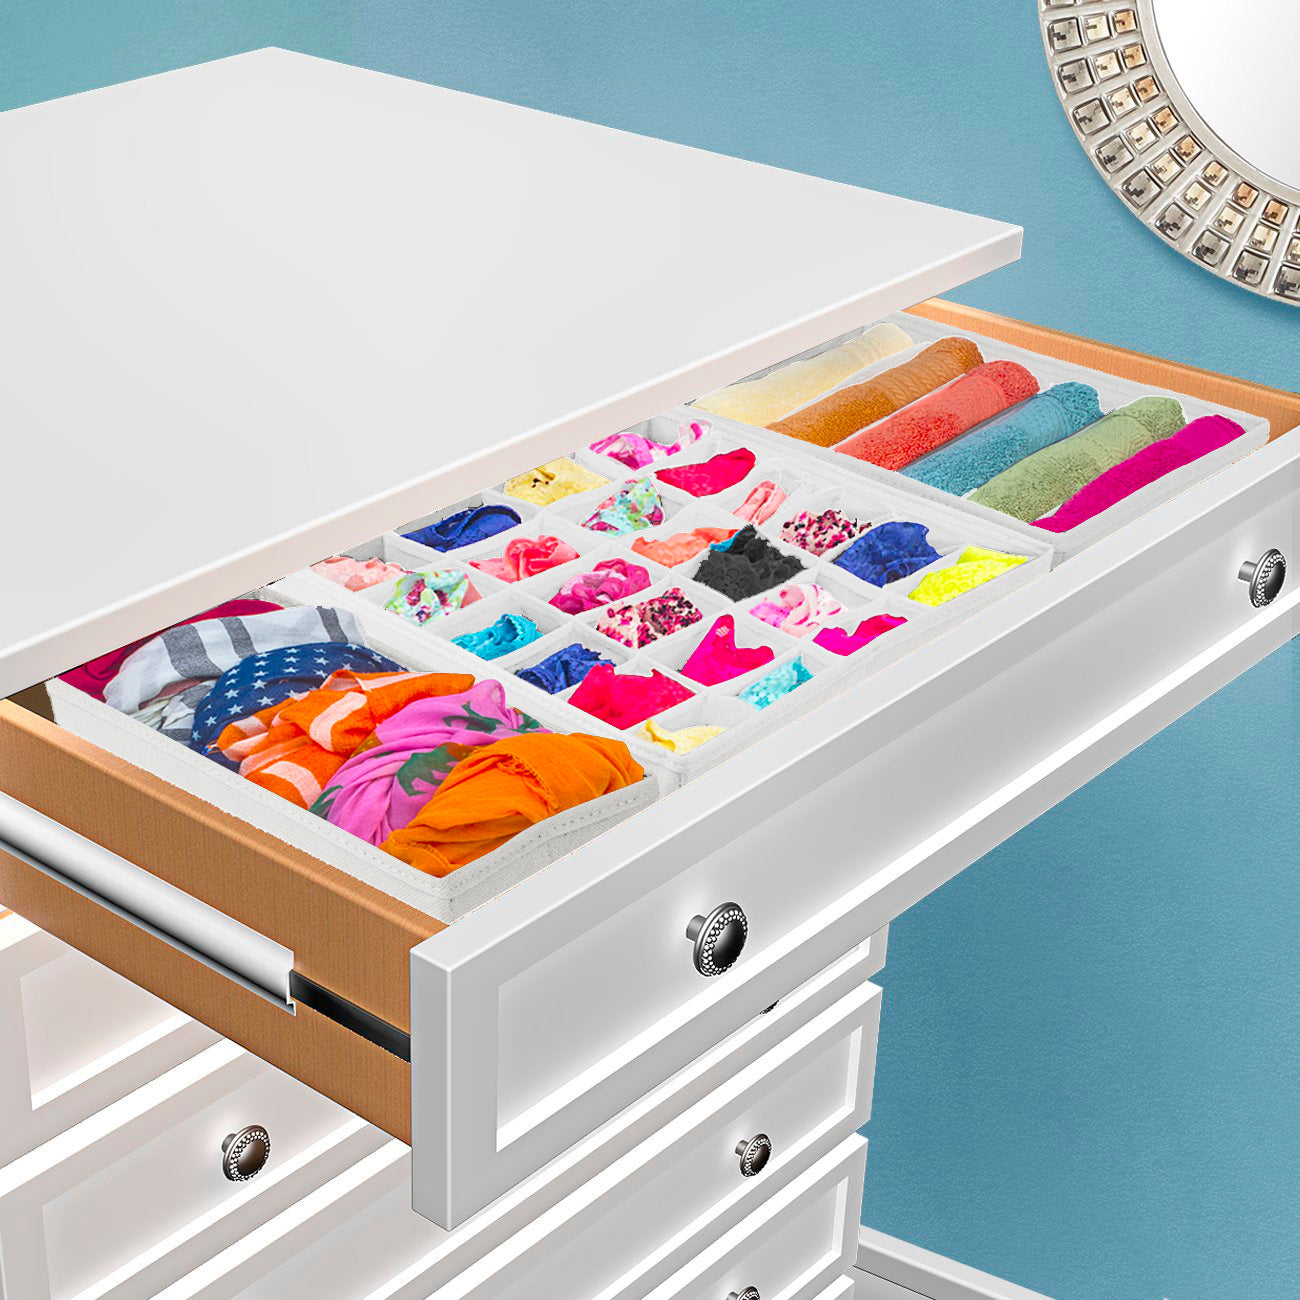 Foldable Drawer Dividers (4-Piece Set)